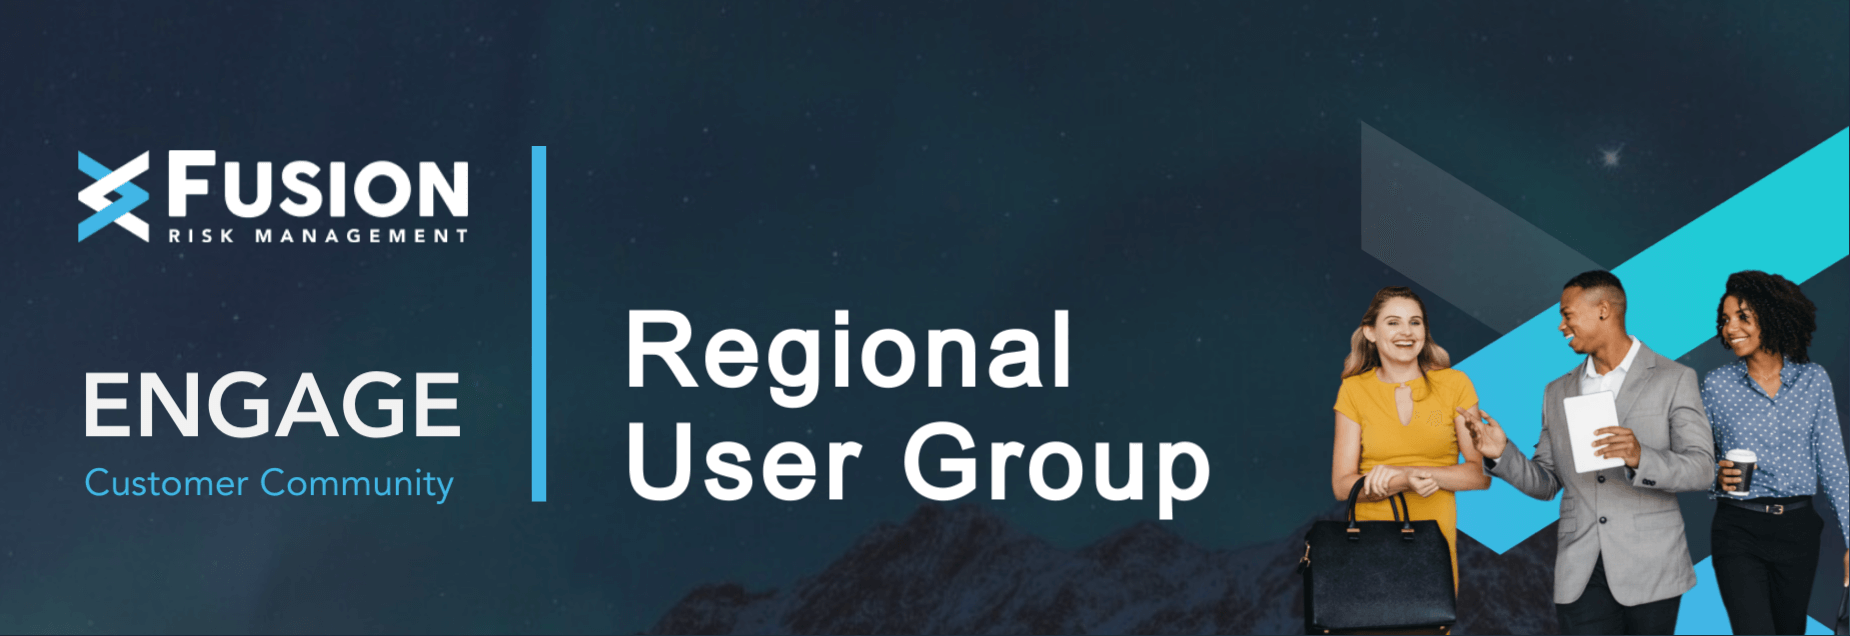 ENGAGE Regional User Group Zoom Banner